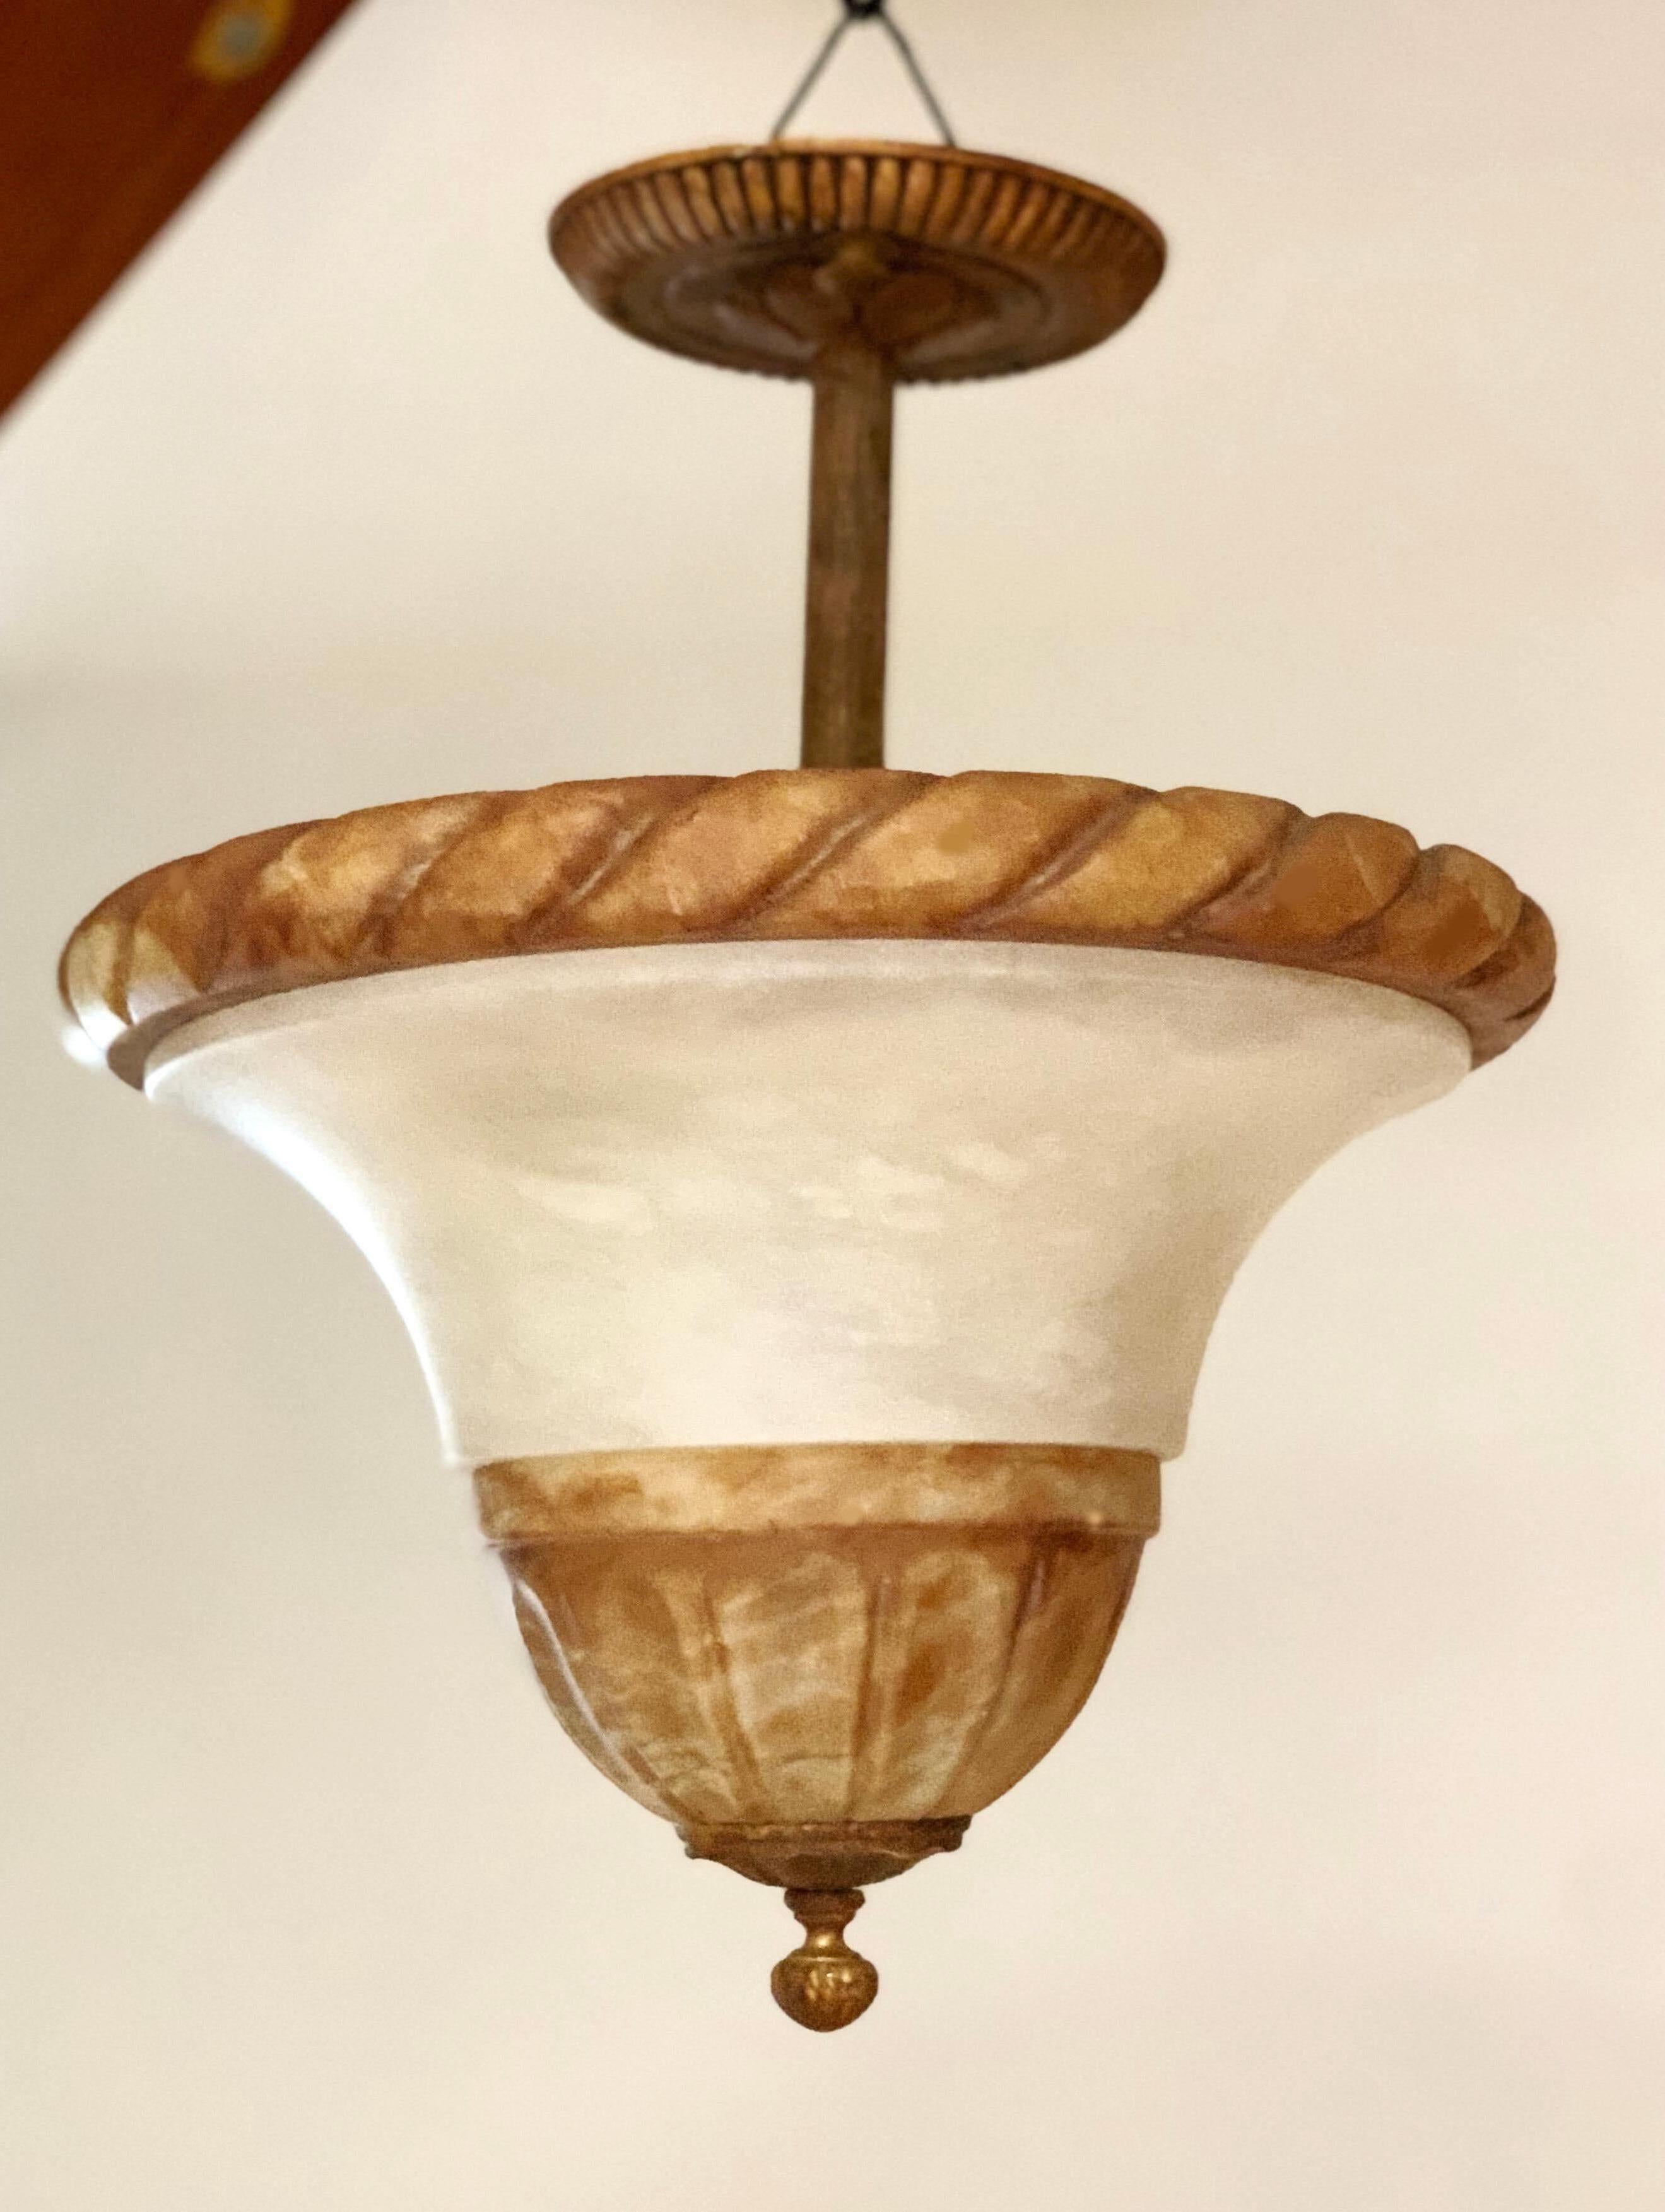 Elegant Italian alabaster modern neoclassical pendant or chandelier in a Classic, pure form that references the Italian 'Novecento' and Art Deco periods. Three lights are inside the fixture.